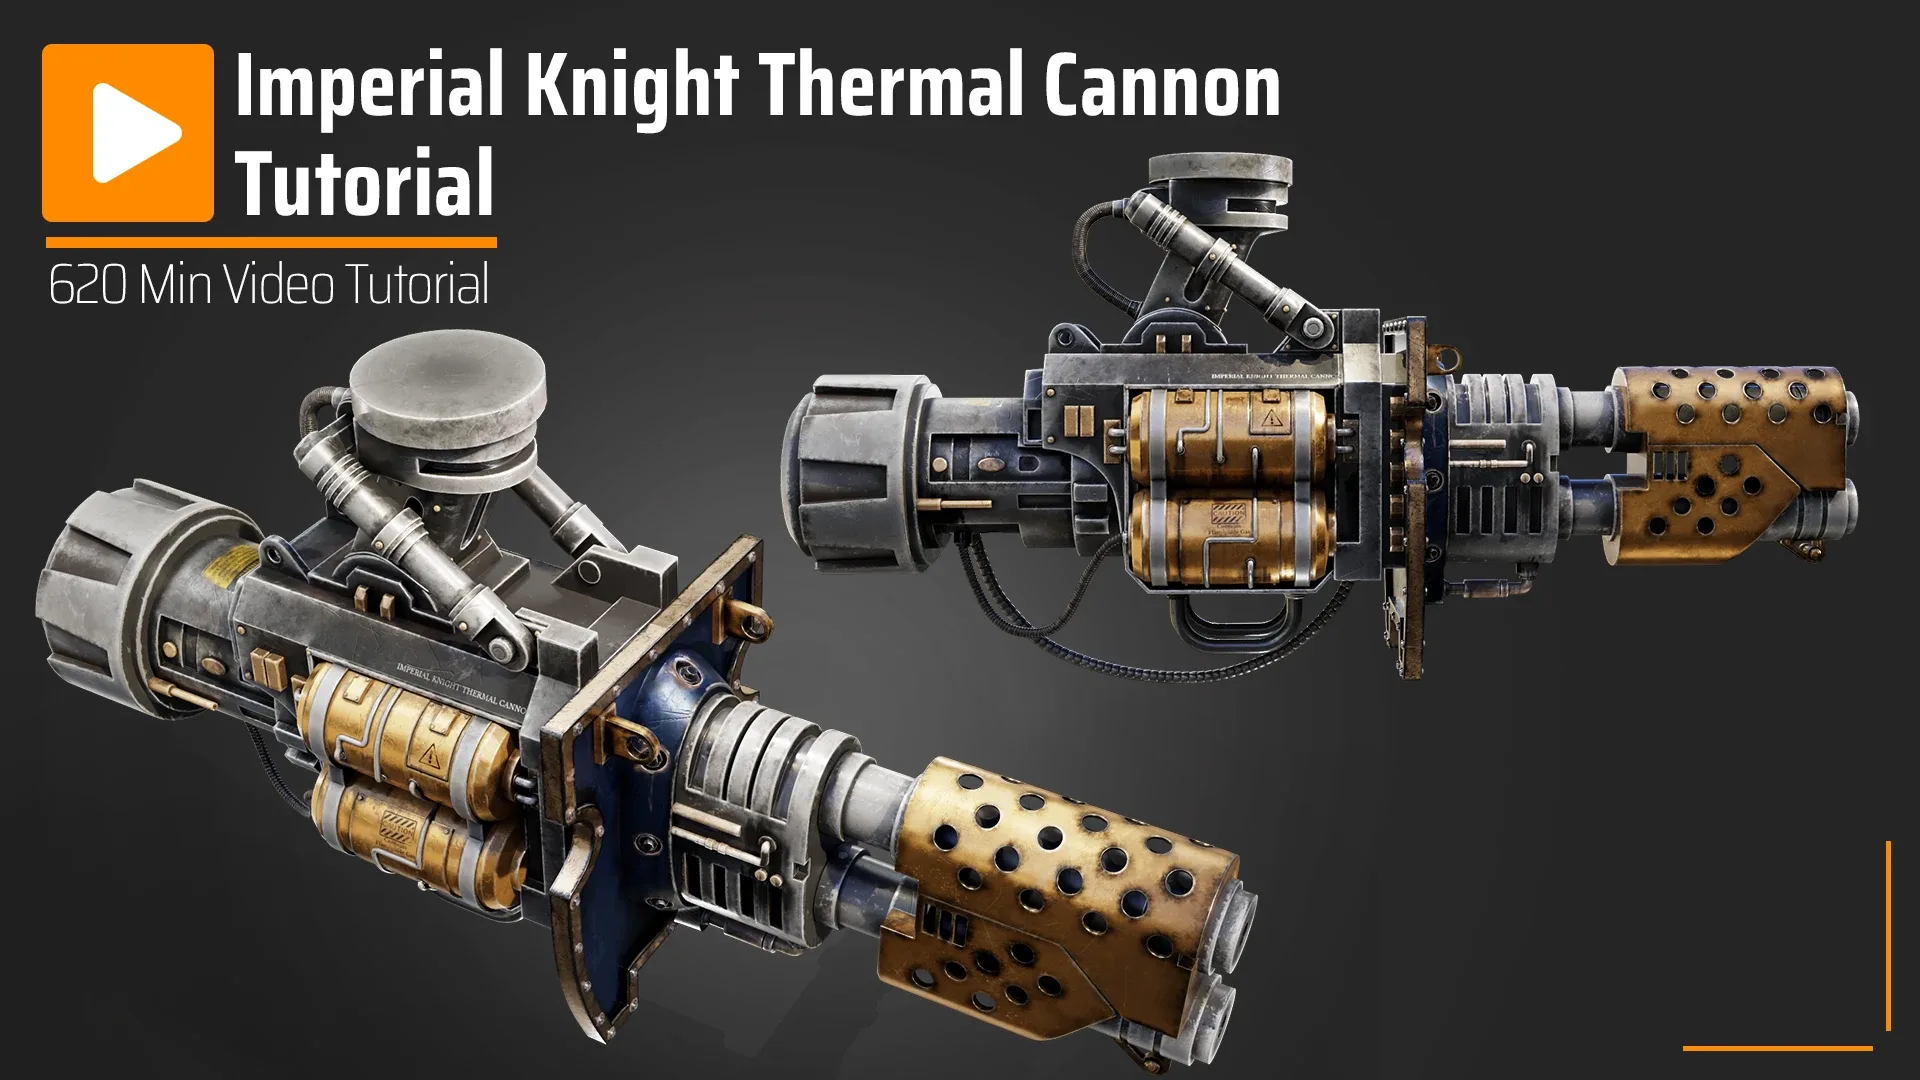 Thermal Cannon